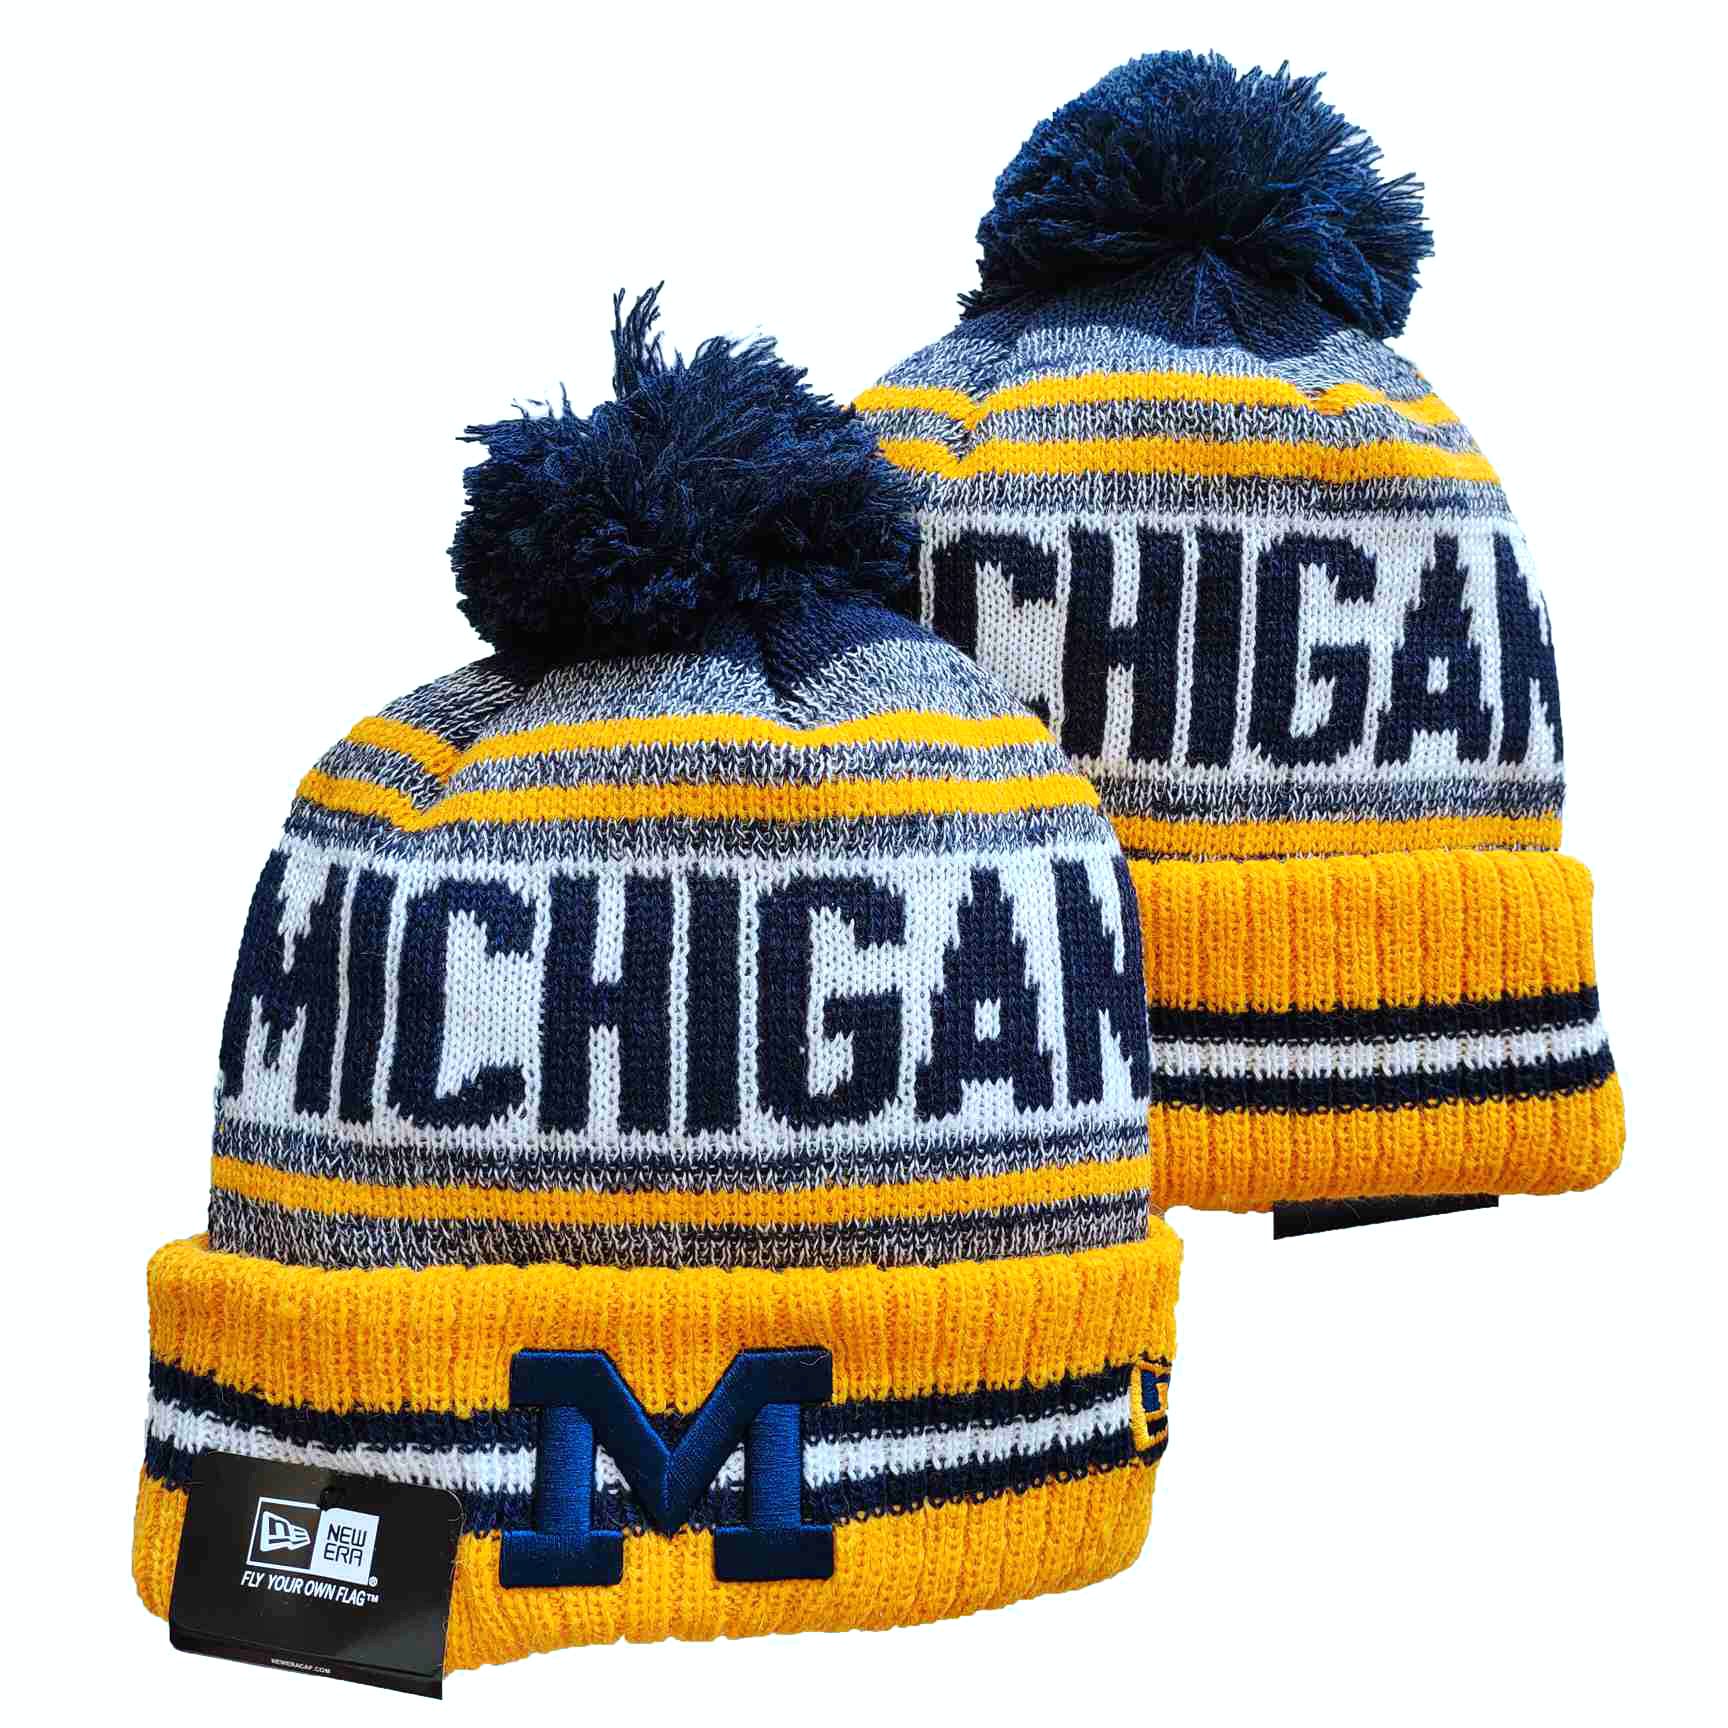 NCAA Michigan Wolverines Beanies Knit Hats-YD423